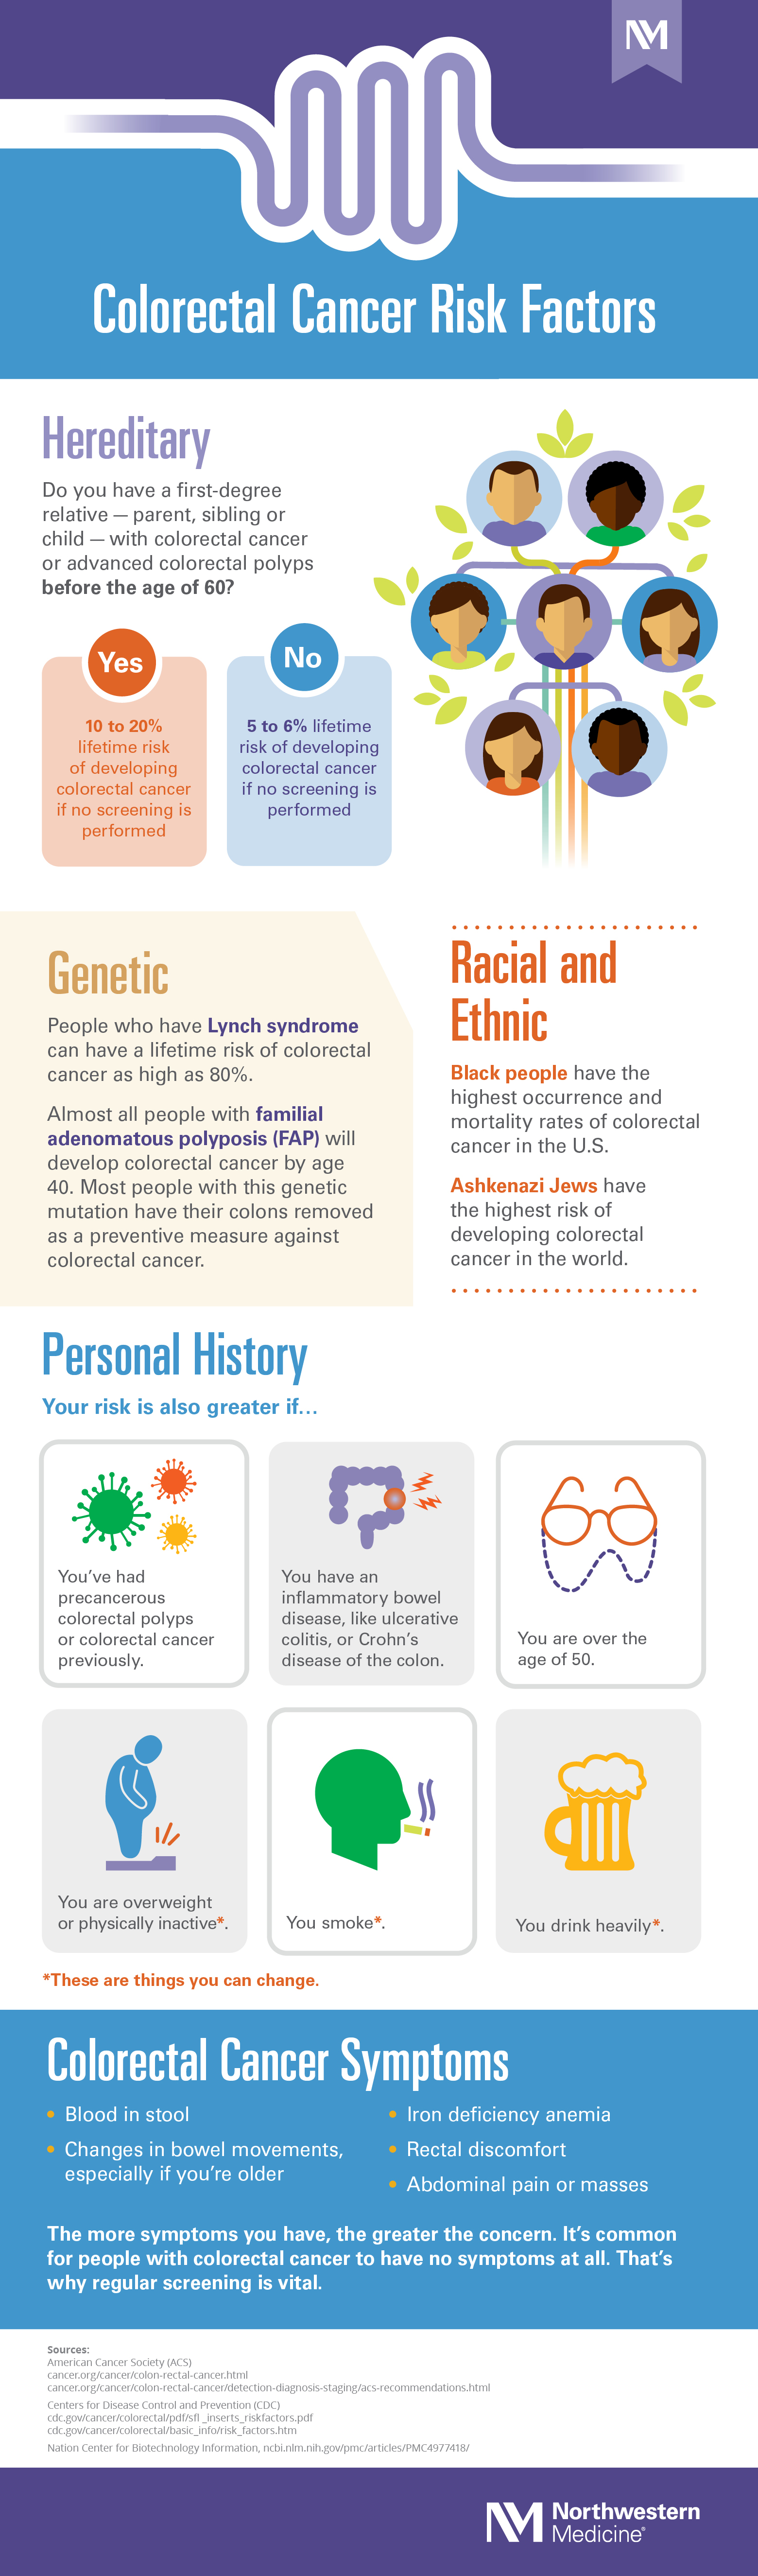 Colorectal Cancer Risk Factors infographic showing Heredity, Genetic, Racial and Ethnic, and Personal History risks and Colorectal Cancer Symptoms 